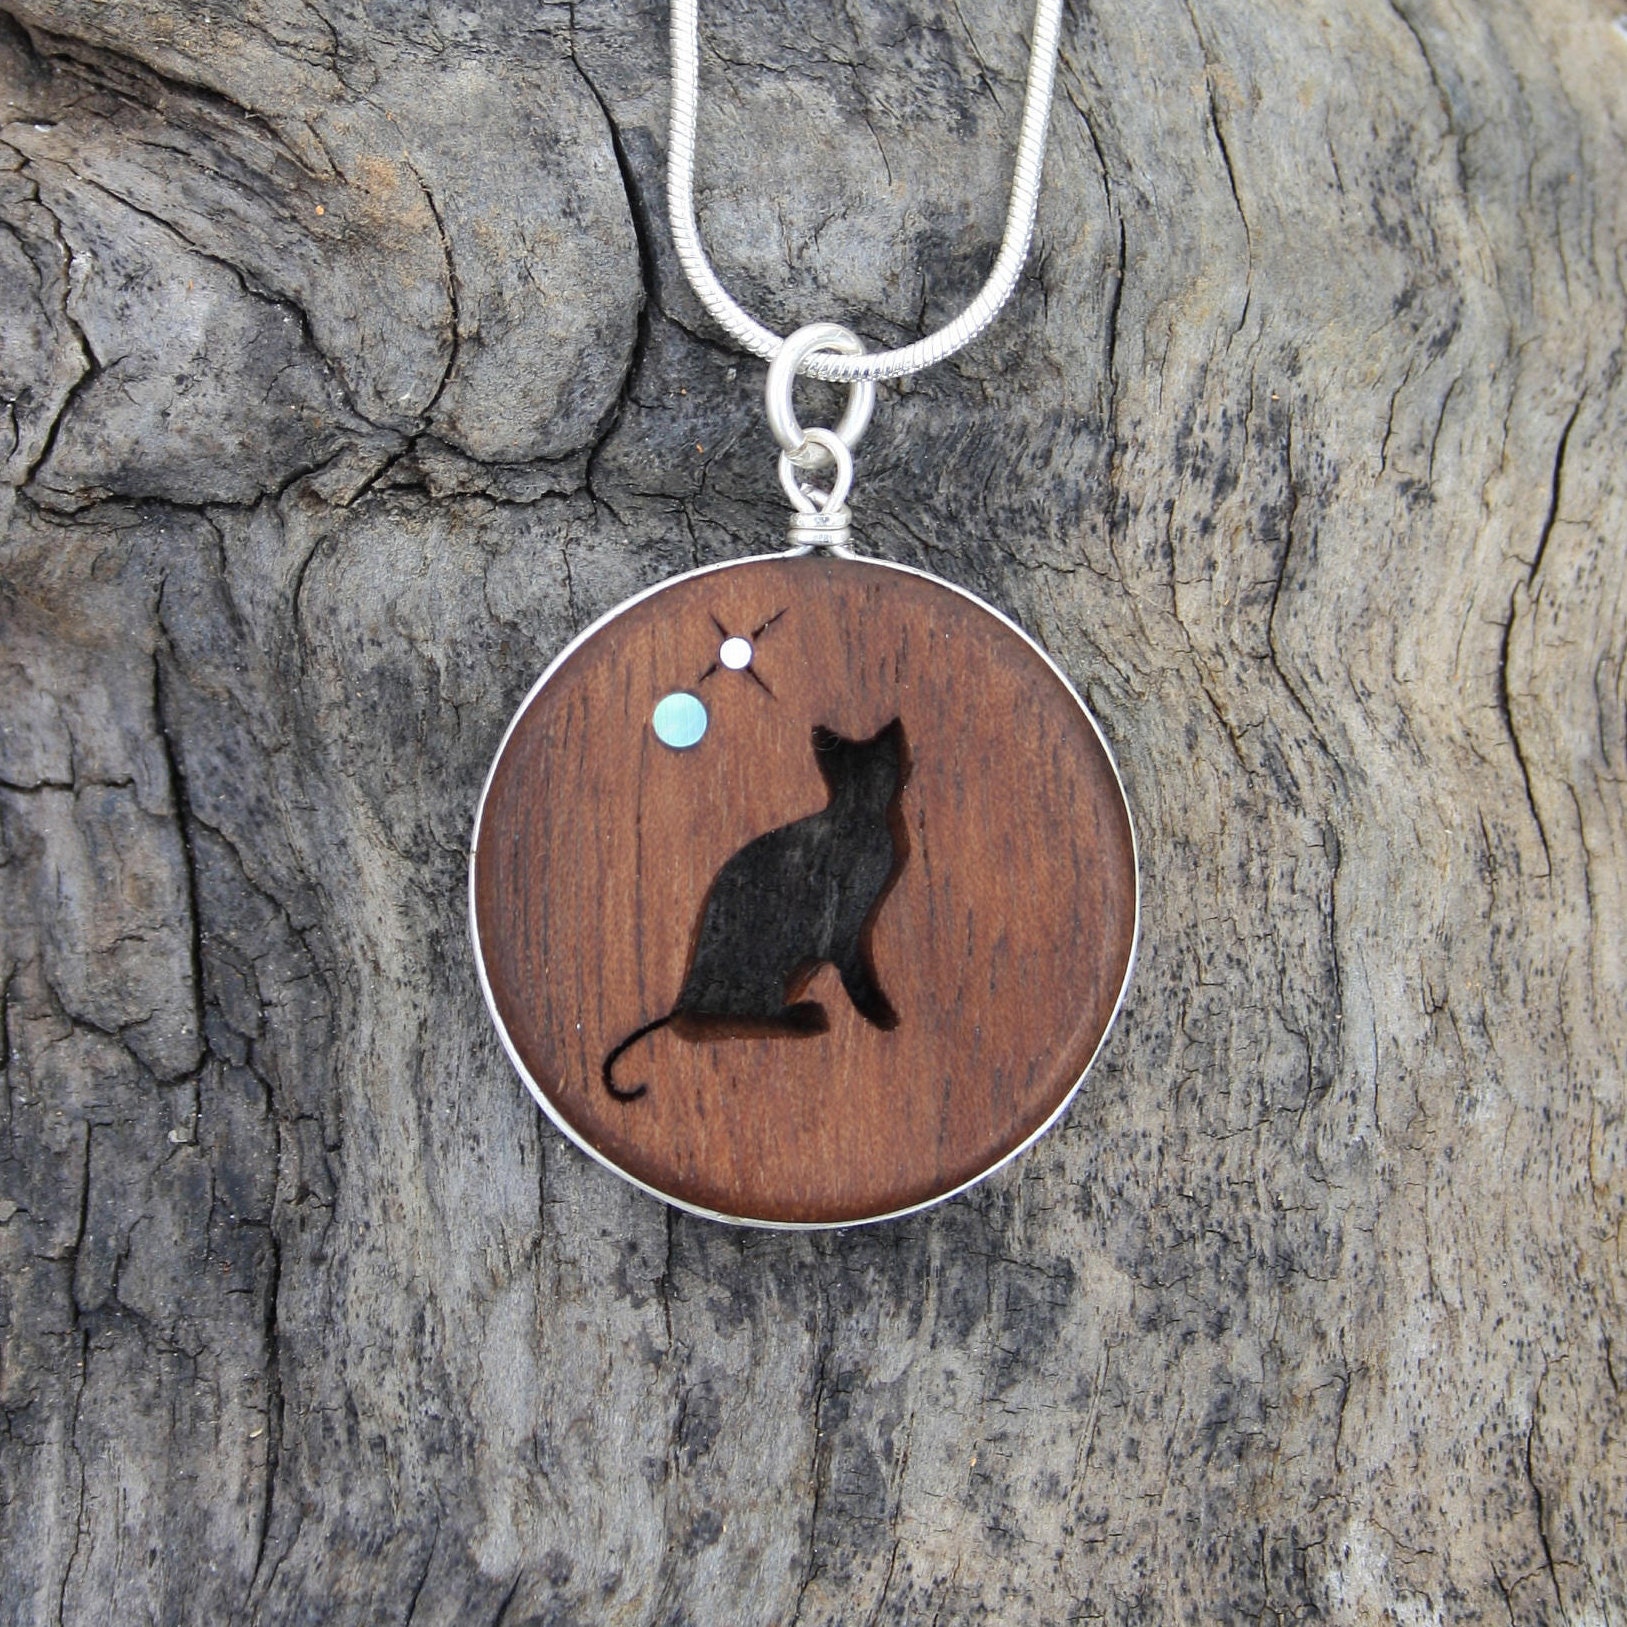 Black Cat and Pumpkin necklace made from recycled Starbucks gift cards –  Katie Carrin Sea Glass Jewelry in San Francisco, California